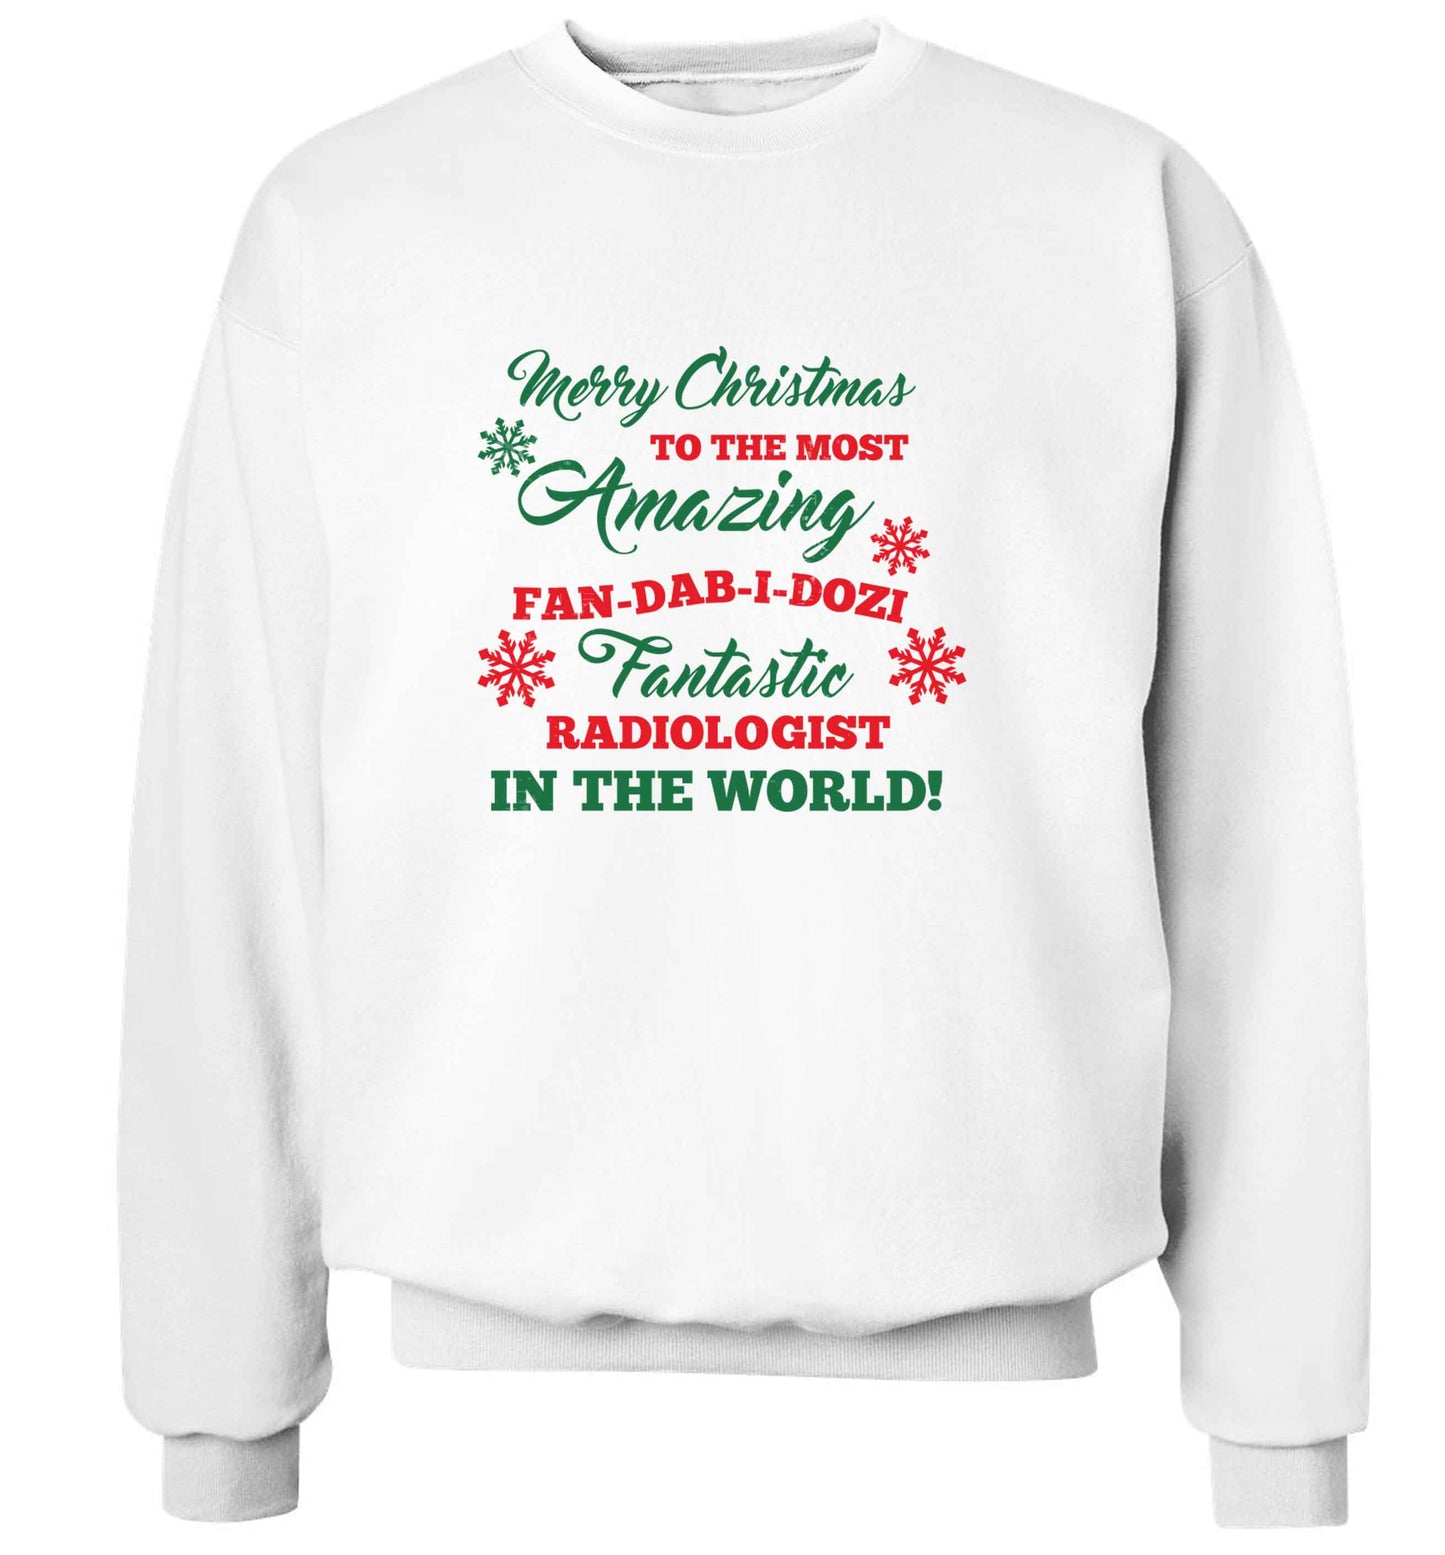 Merry Christmas to the most amazing radiologist in the world! adult's unisex white sweater 2XL